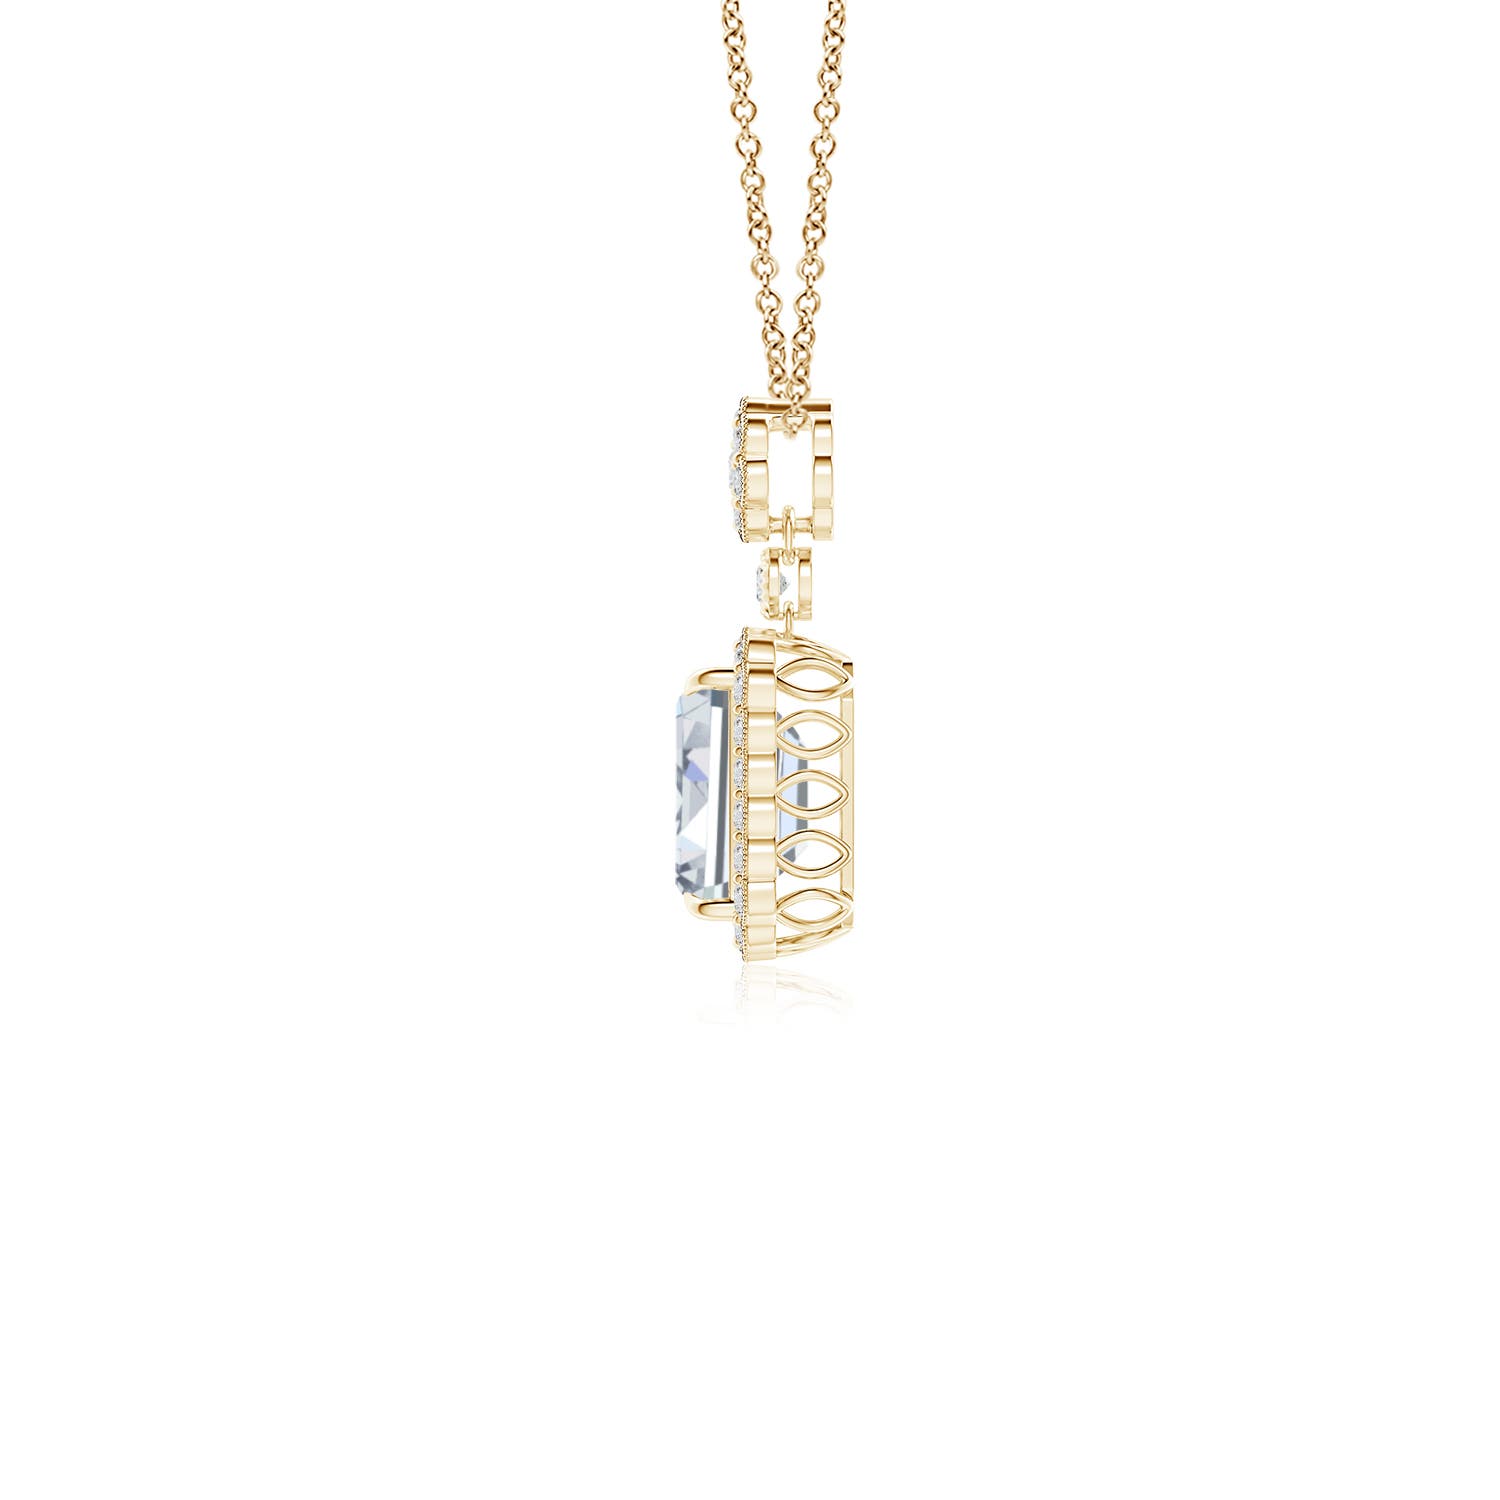 H, SI2 / 1.37 CT / 14 KT Yellow Gold